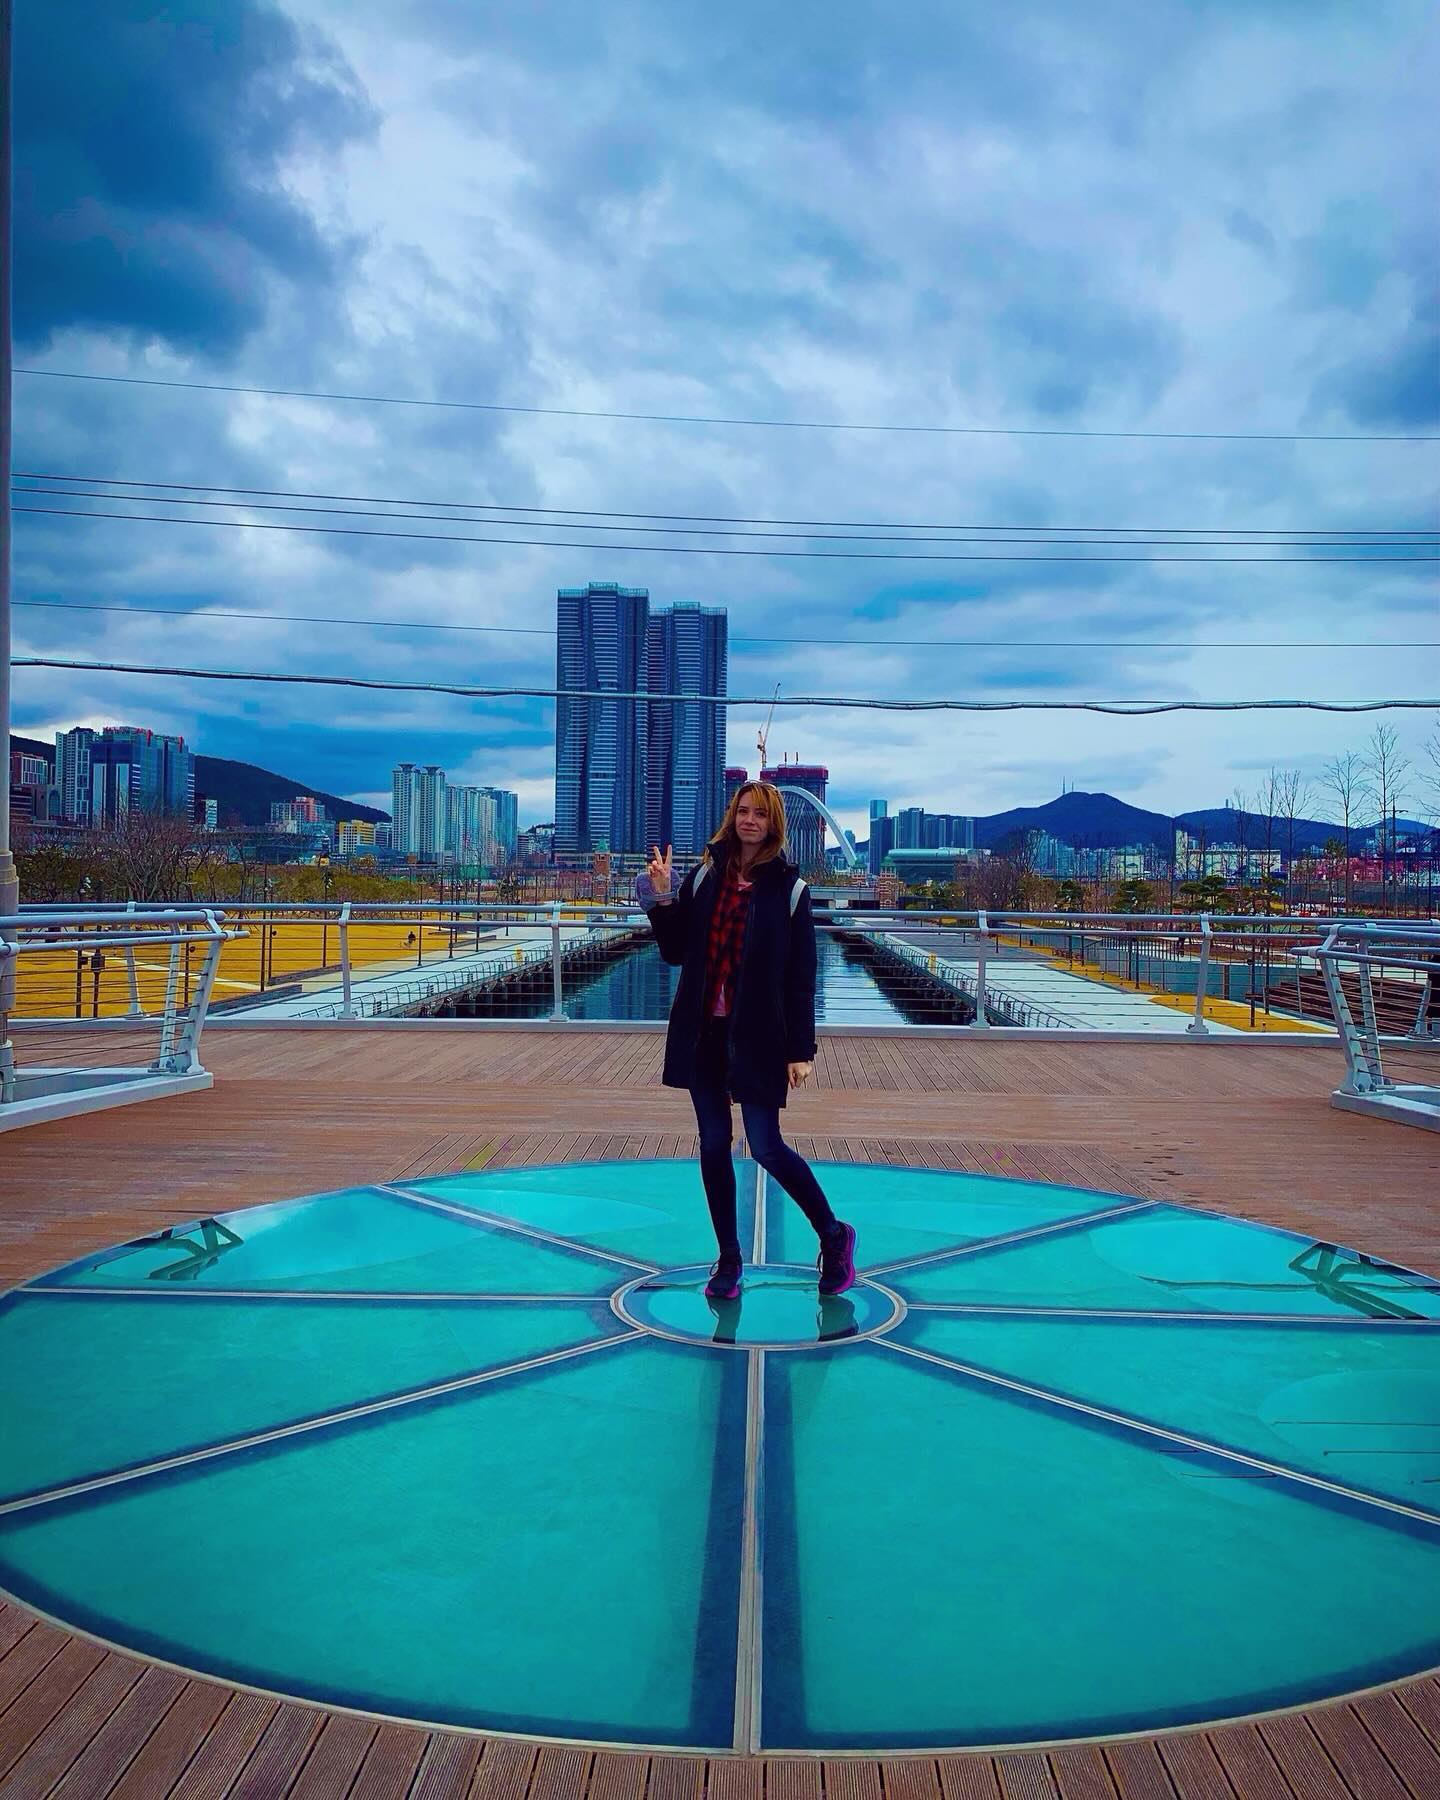 The stage is yours 🤭💋 #stage #star #acting #love #blogger #travel #busan #korea #citygirl #happy #only